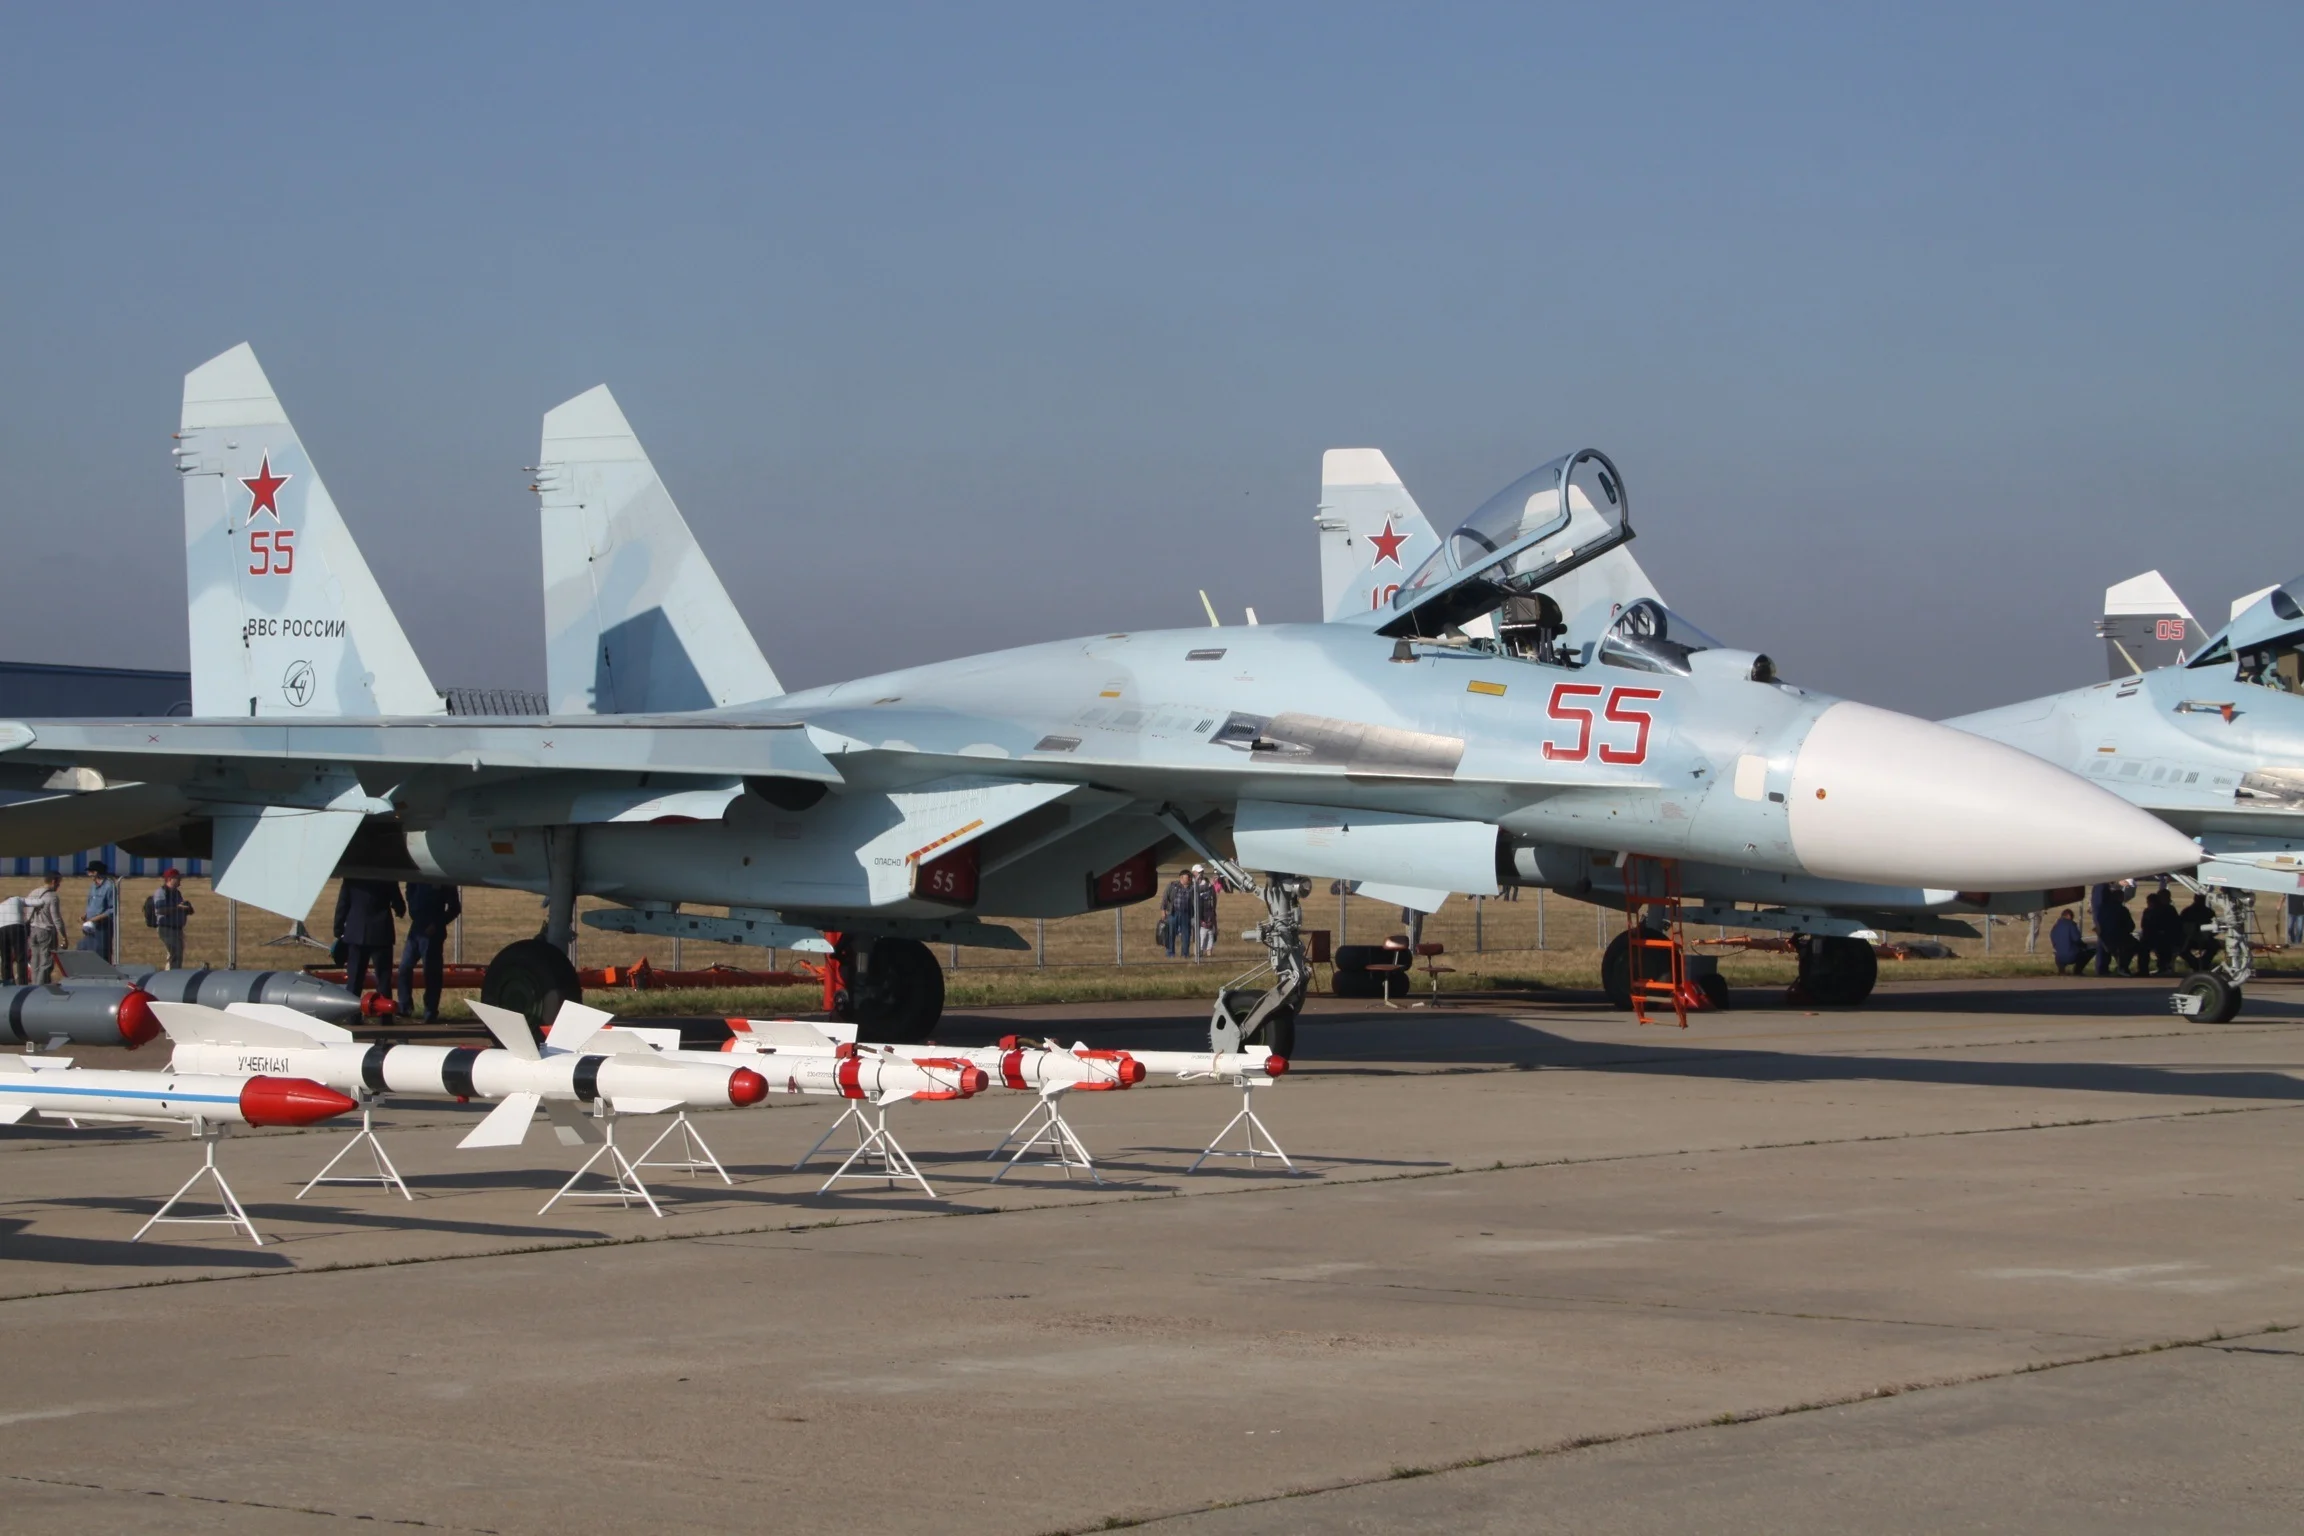 THE RUSSIAN "KILLER": The SU-35 of the Russian Air Force